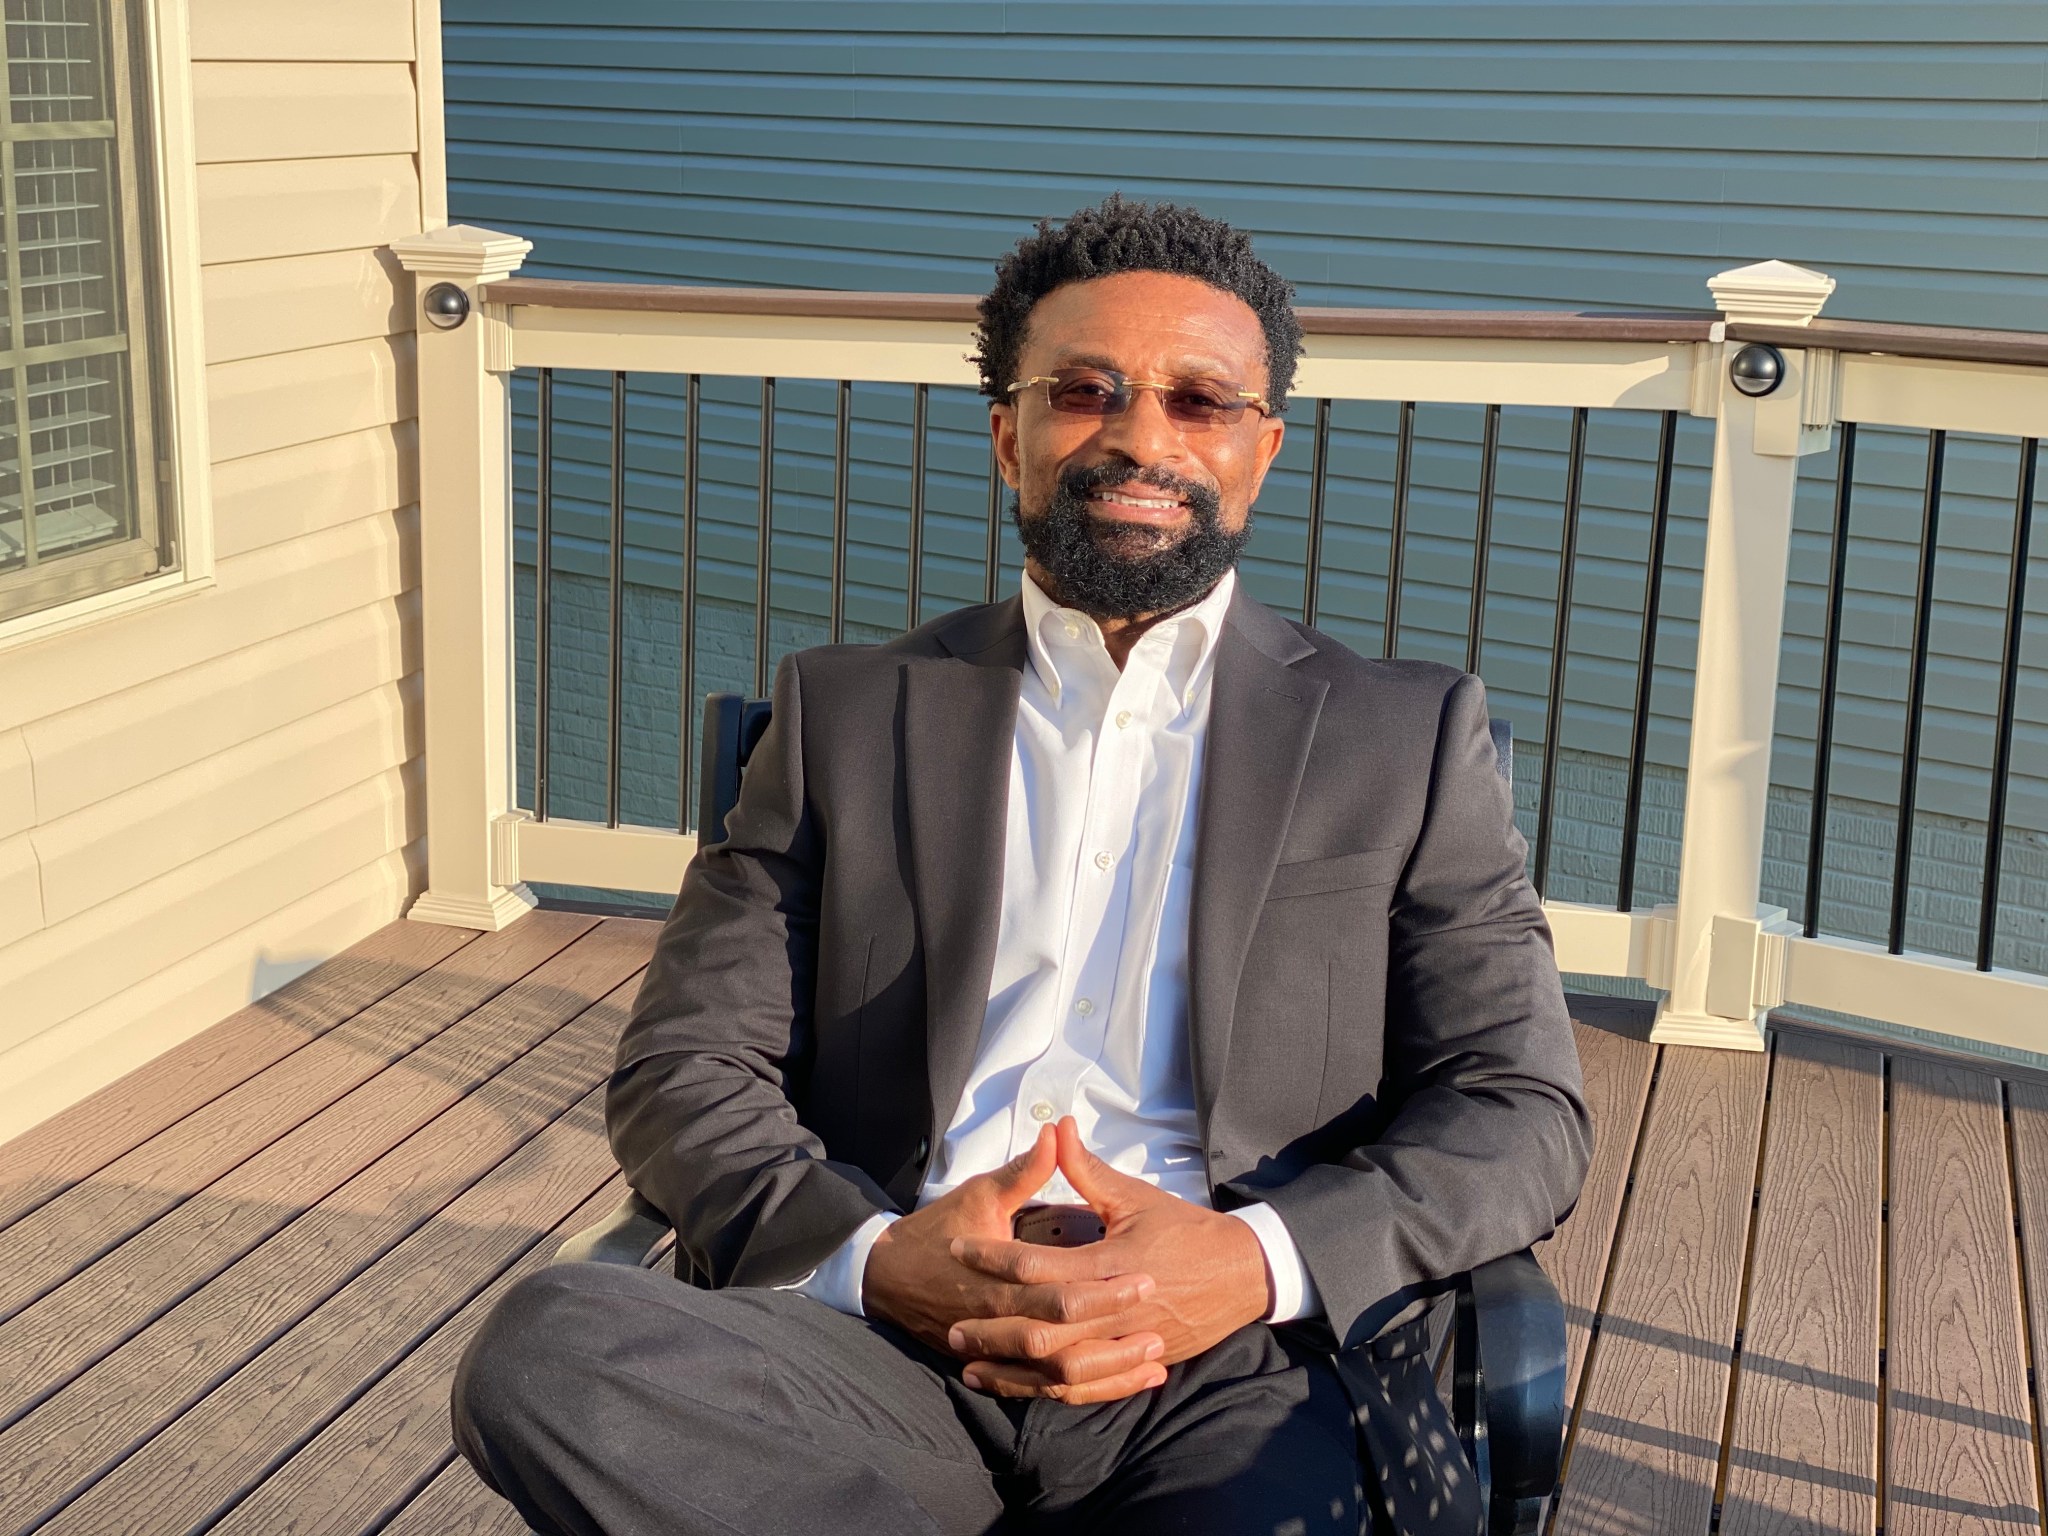 Moses Adoko, a man with short, curly black hair and beard, smiles and relaxes in a chair on a sunny deck. He wears a gray suit with white shirt, and small tinted glasses.